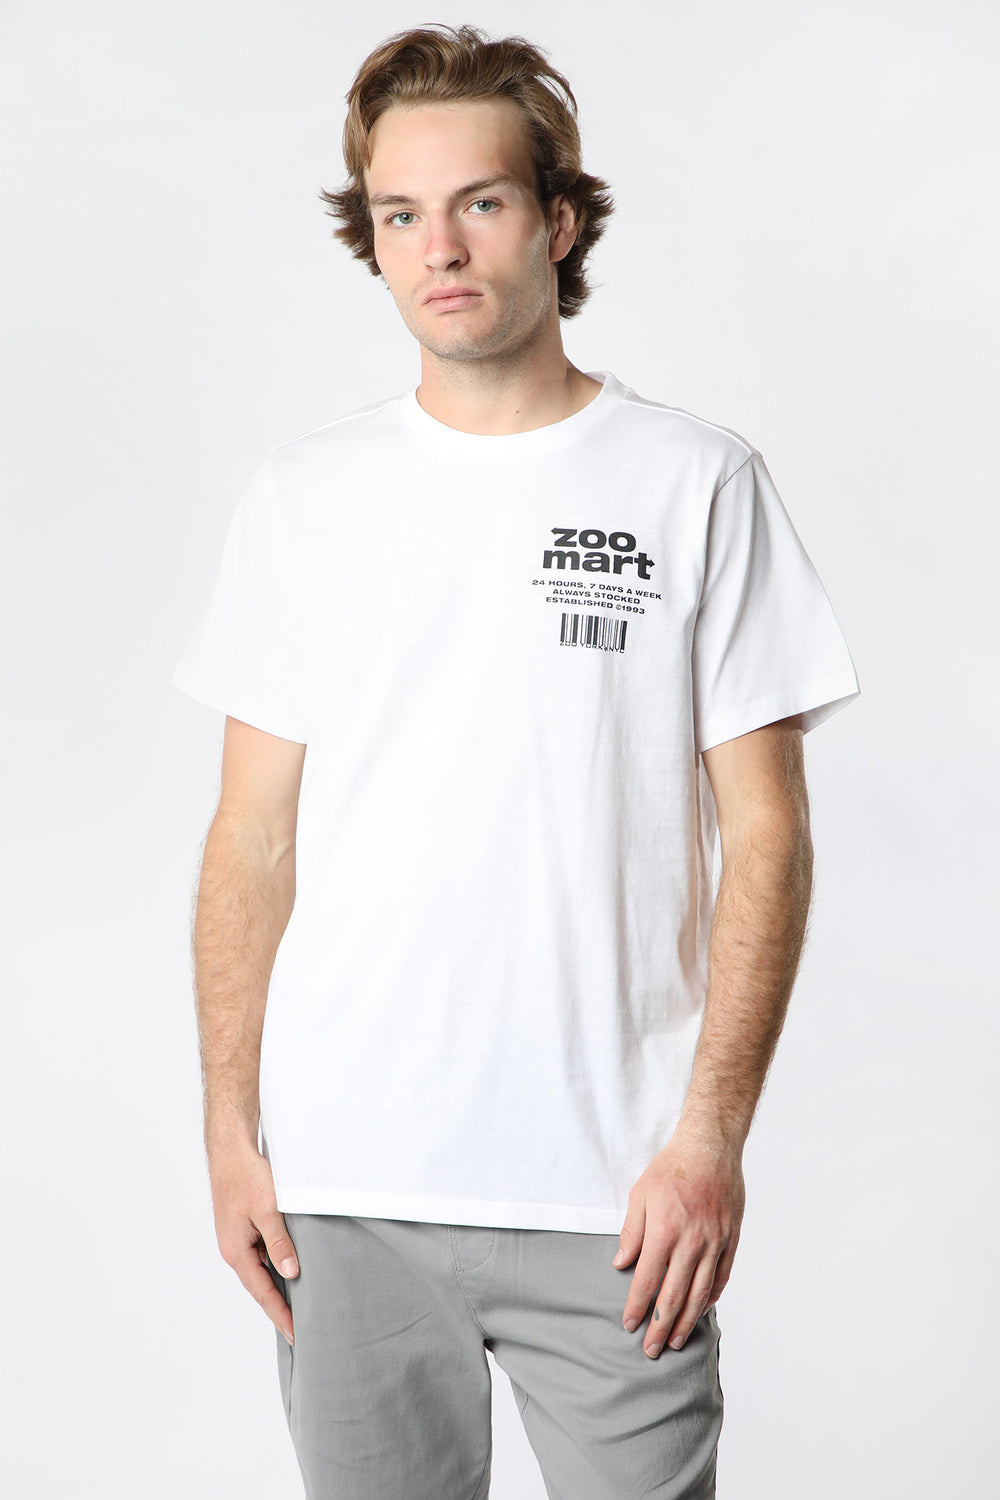 T-Shirt Thank You, Come Again Zoo York Homme T-Shirt Thank You, Come Again Zoo York Homme